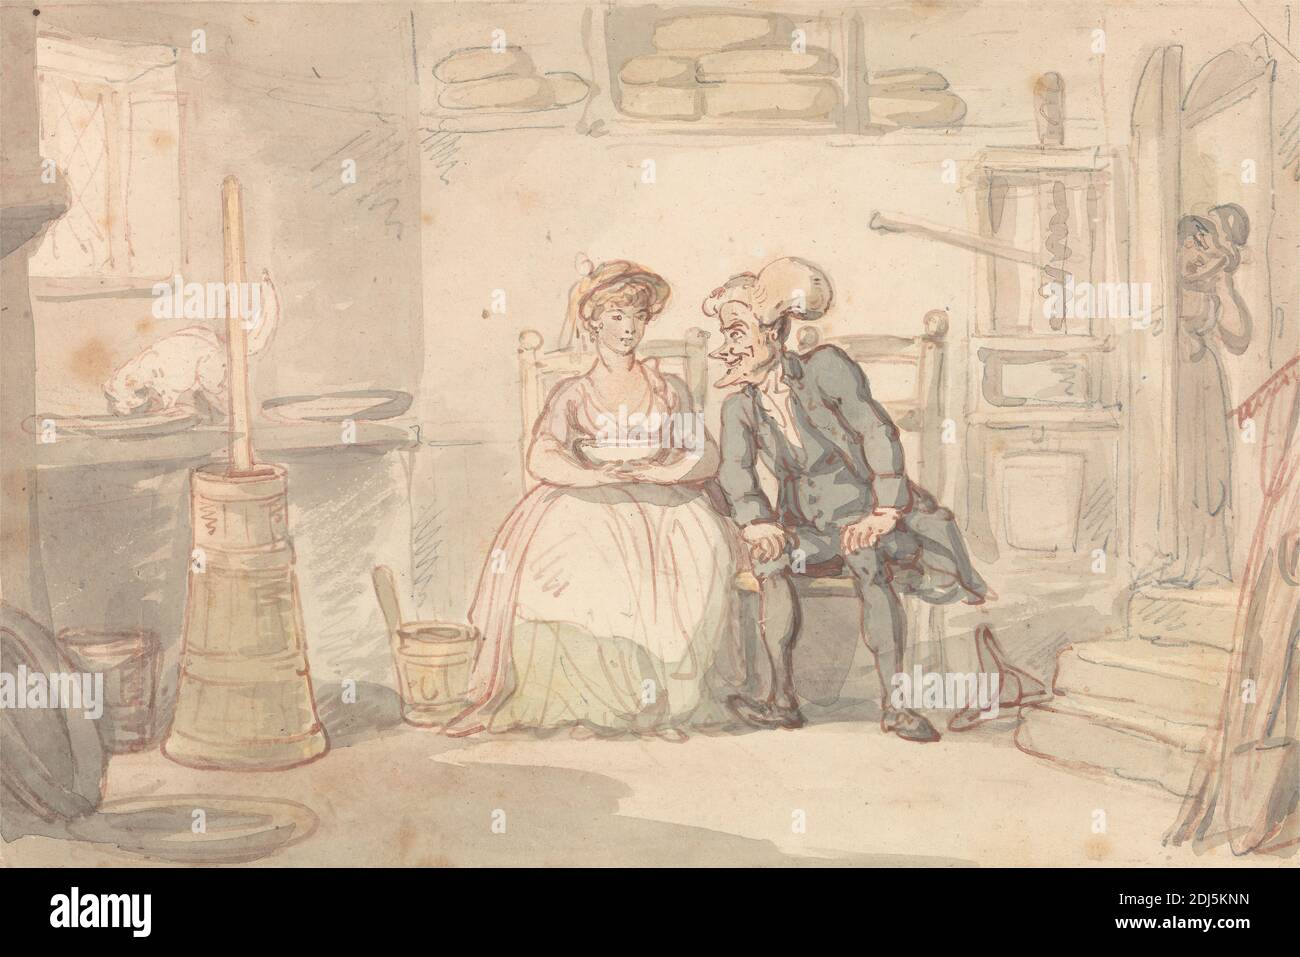 Dr Syntax & Dairymaid, Thomas Rowlandson, 1756–1827, British, 1821, Watercolor with pen and red ink and graphite on medium, slightly textured, cream wove paper mounted on moderately thick, slightly textured, cream wove paper, Mount: 8 11/16 x 11 1/4 inches (22.1 x 28.6 cm) and Sheet: 5 5/16 x 7 13/16 inches (13.5 x 19.8 cm), bucket (vessel), butter churns, cat (domestic cat), dairymaids, dishes, doorway, elderly, genre subject, hat, interior, kitchen, man, shelves, hanging, shovel, stairs, Table - mixing, window, woman, youth Stock Photo